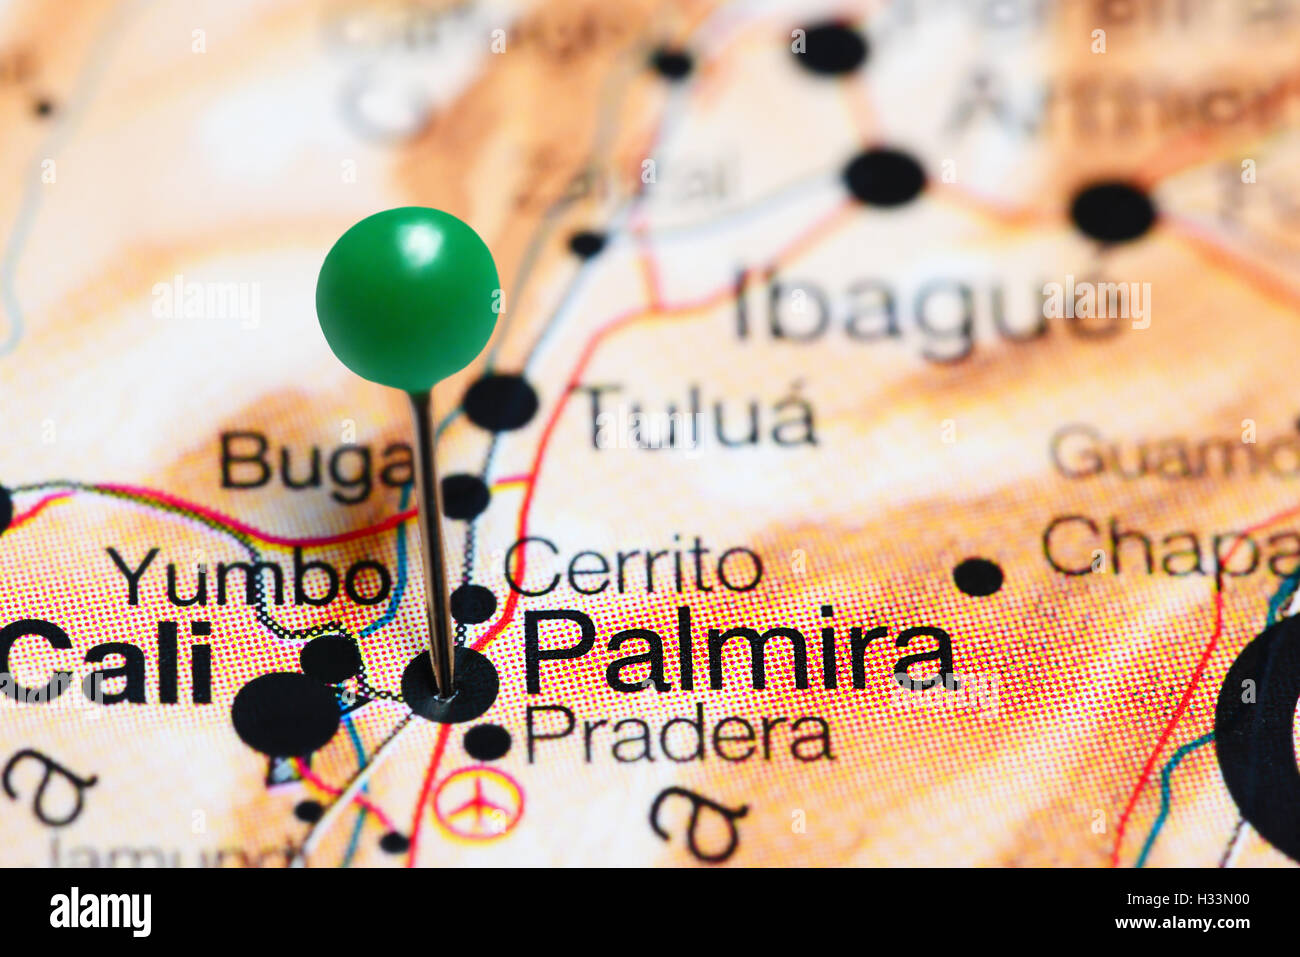 Palmira pinned on a map of Colombia Stock Photo